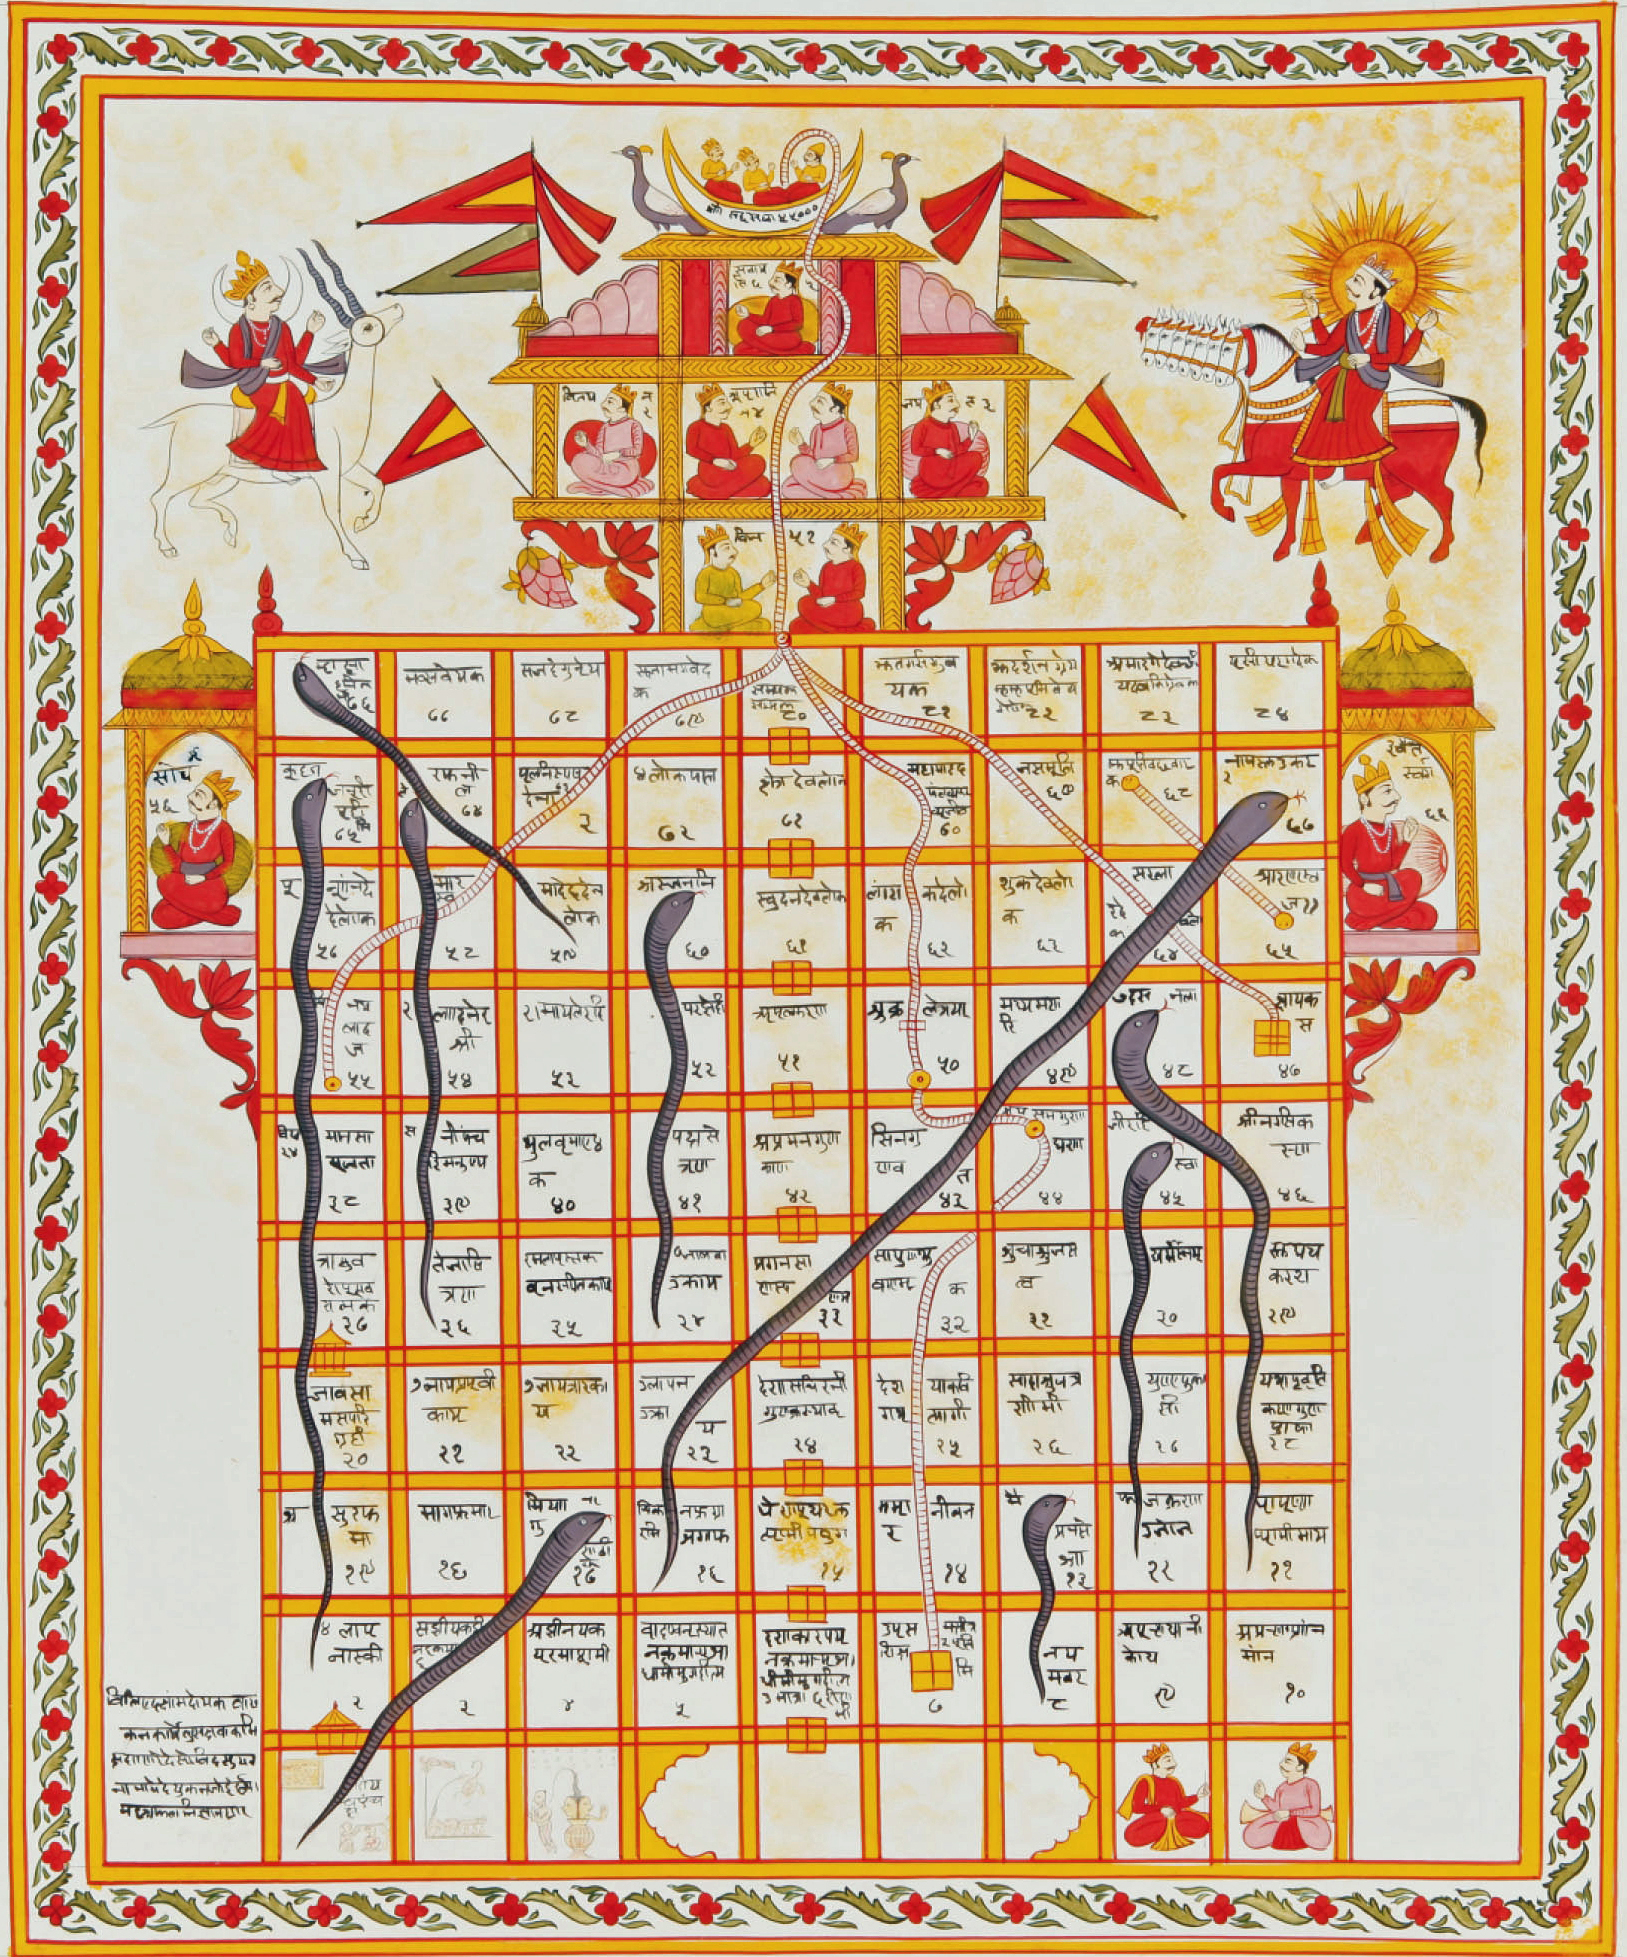 Hindu Snakes and Ladders